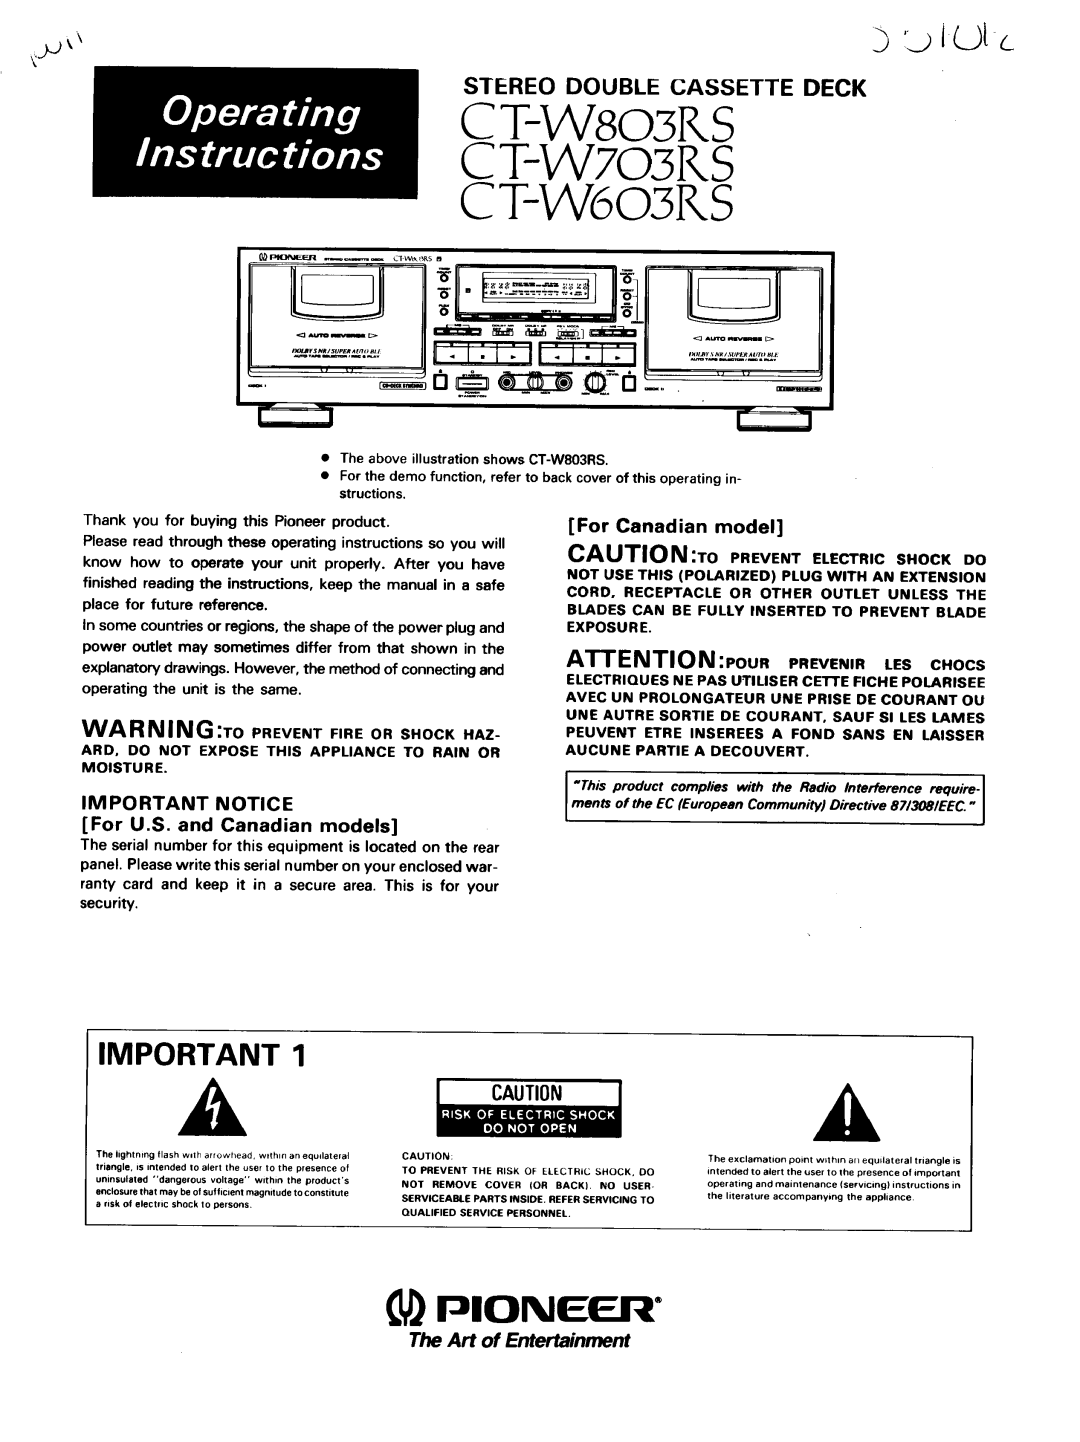 Pioneer CT-W603RS, CT-W803RS operating instructions Pioneer, Stereo Double Cassette Deck, For Canadian model, i tJlc 